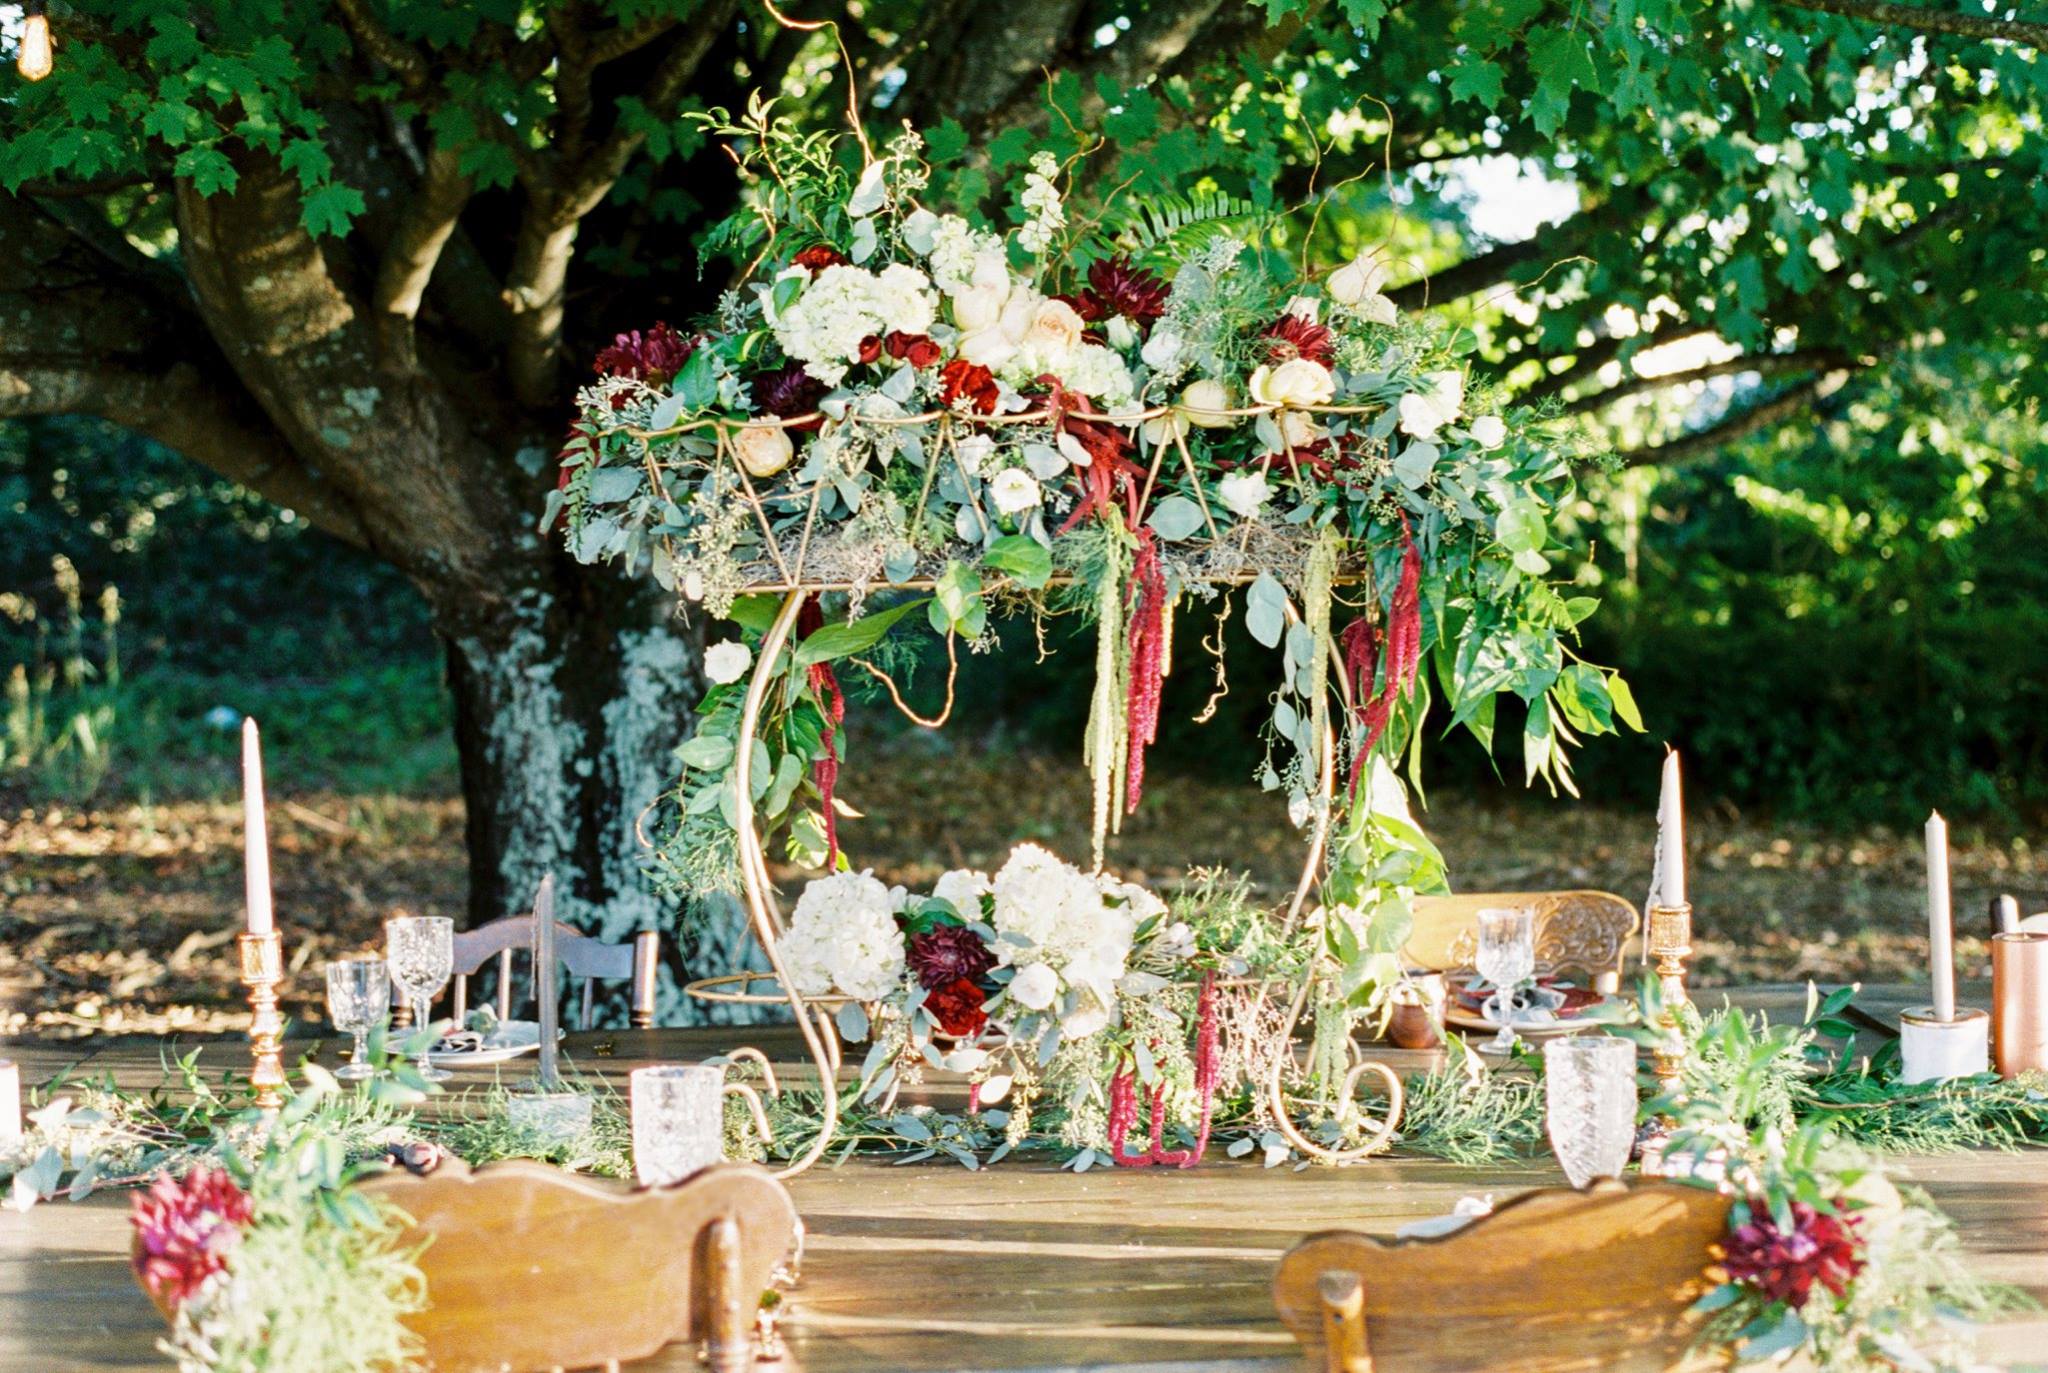 Large floral table arrangement from Southern Knot Weddings and Floral Design by Michelle Lea Photographie | The Pink Bride® www.thepinkbride.com